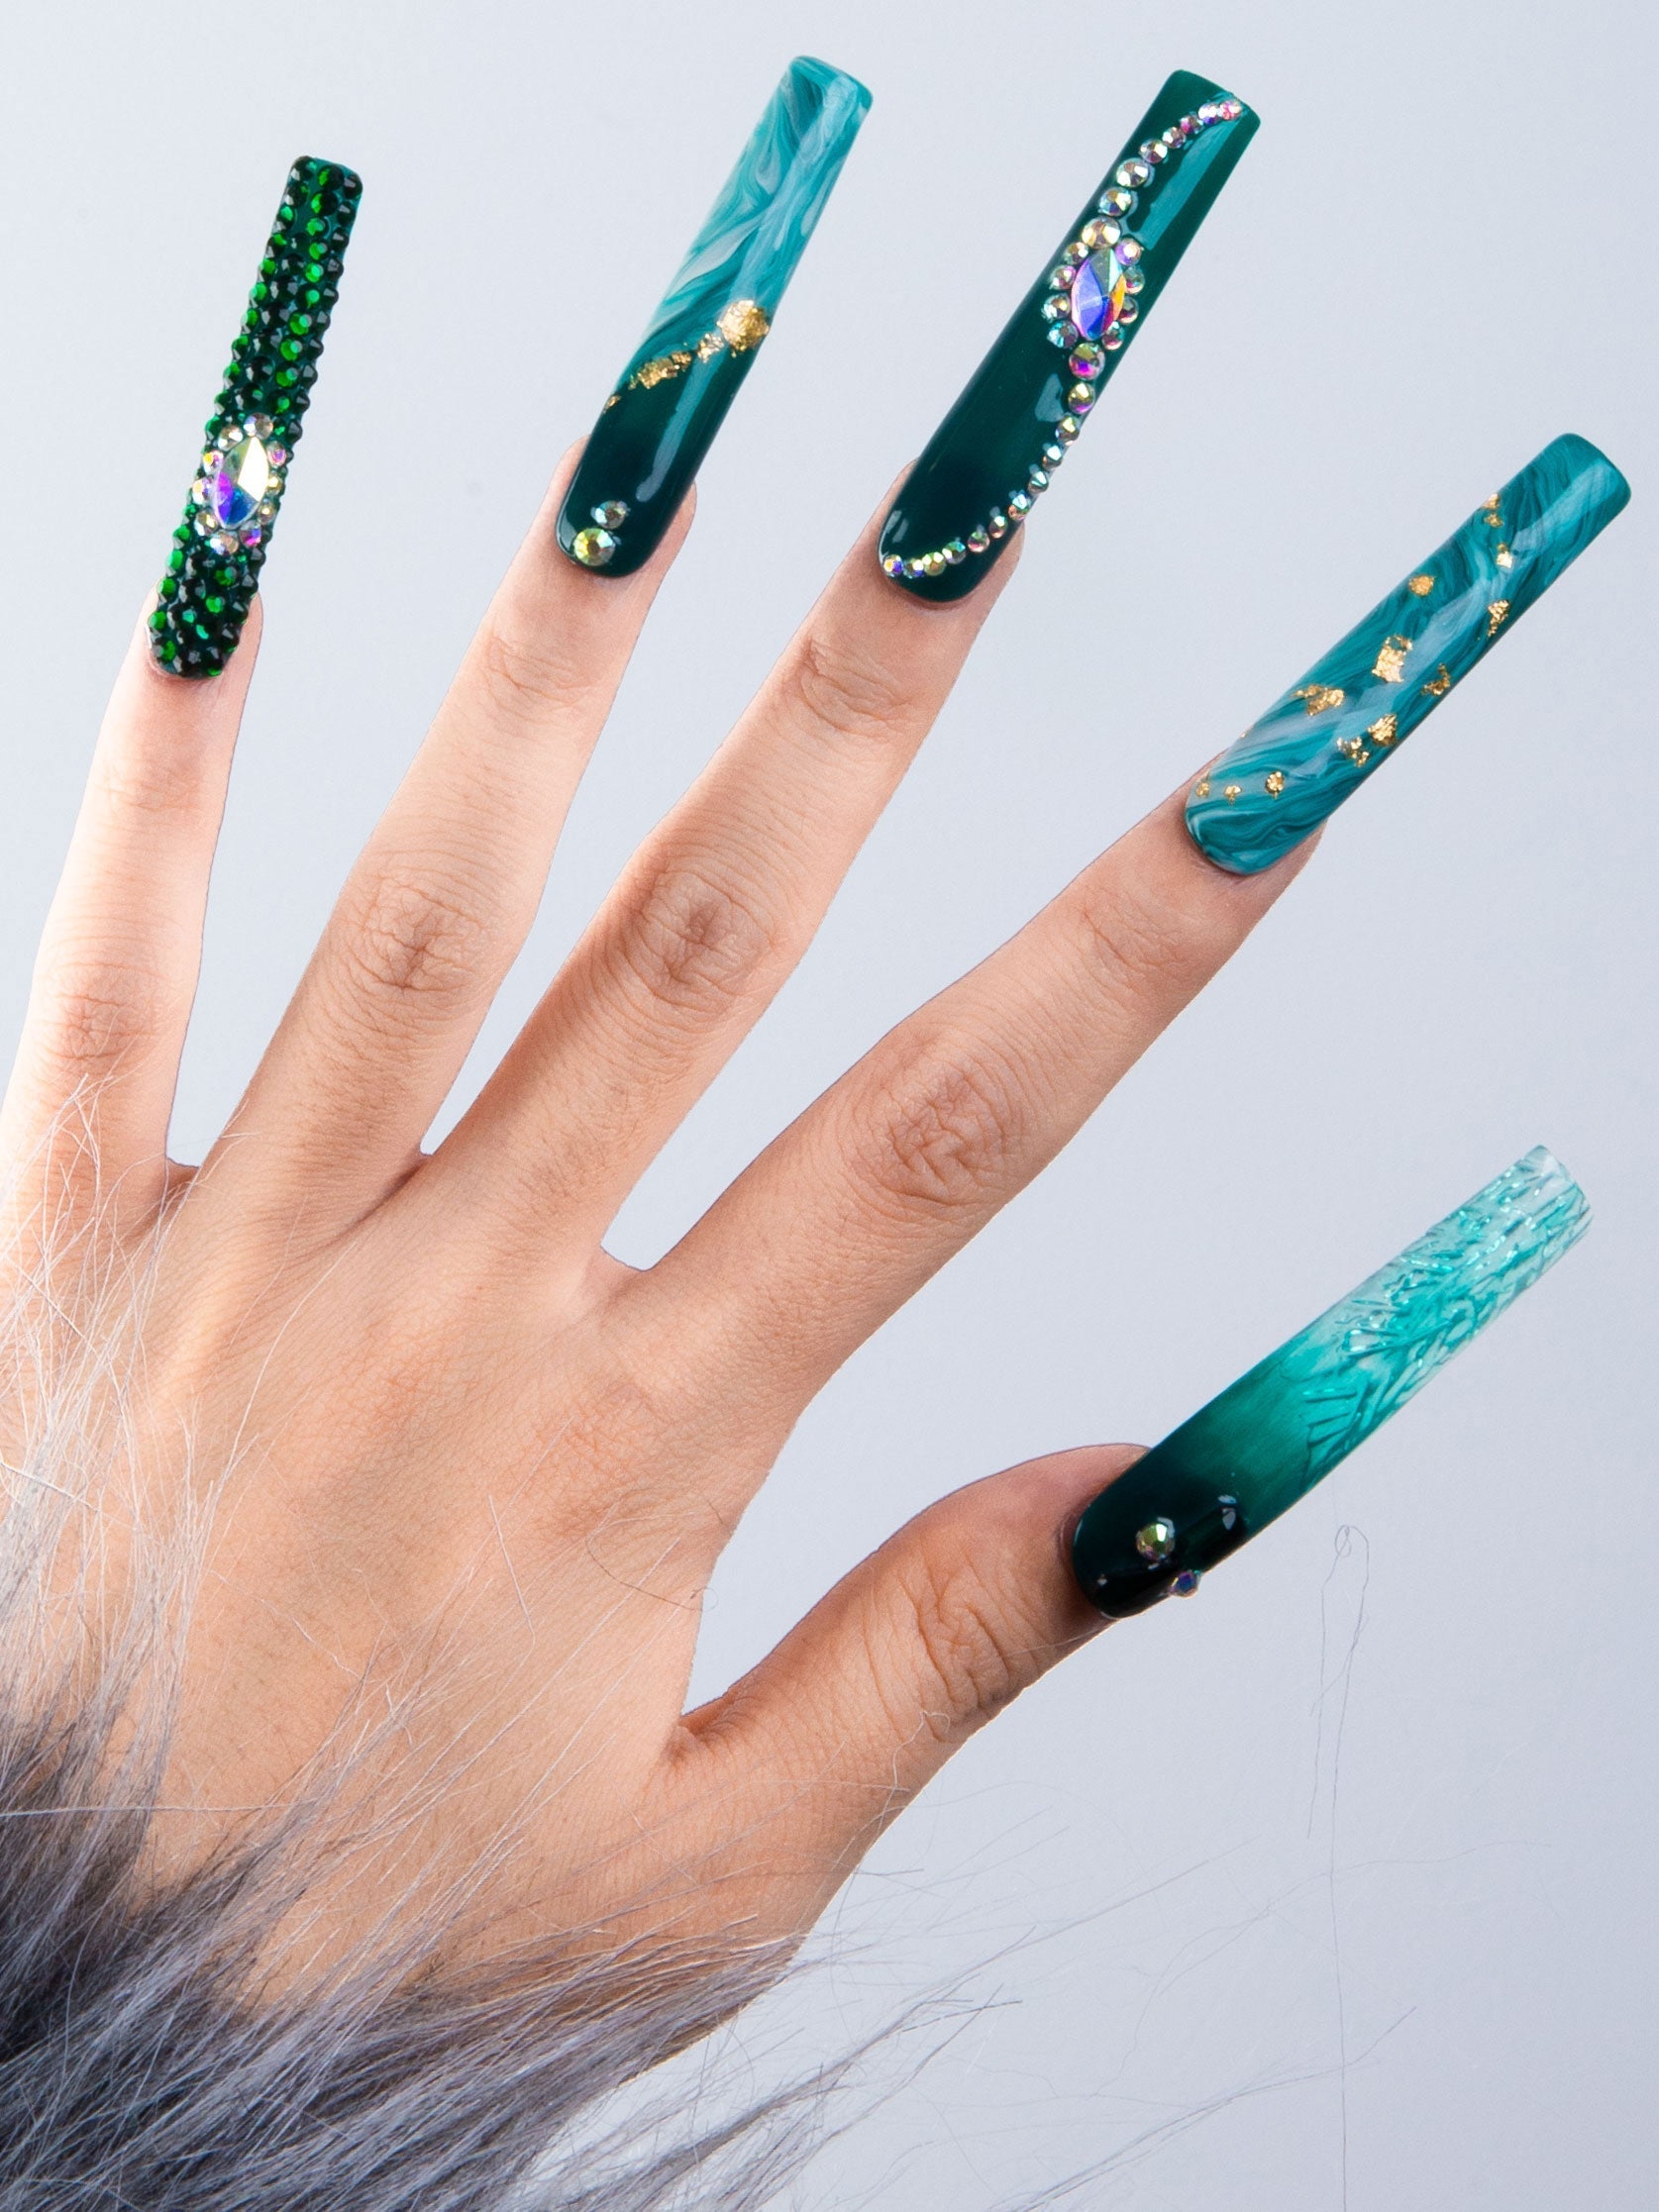 Hand wearing Lovful's Emerald Envy square press-on nails with intricate gold decor and a green liquid flowing design, evoking the allure of a hidden woodland realm.